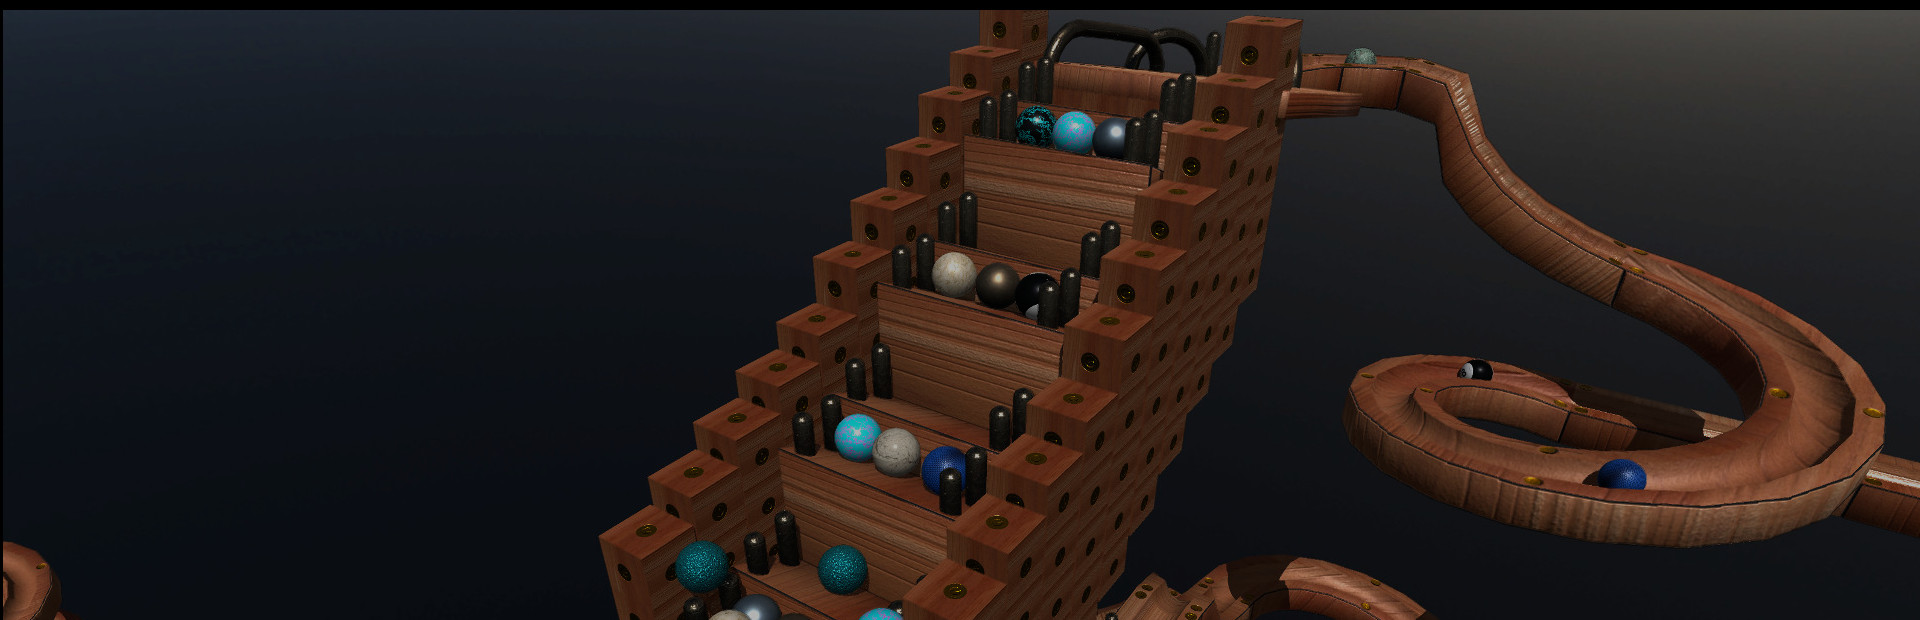 Marble Run cover image